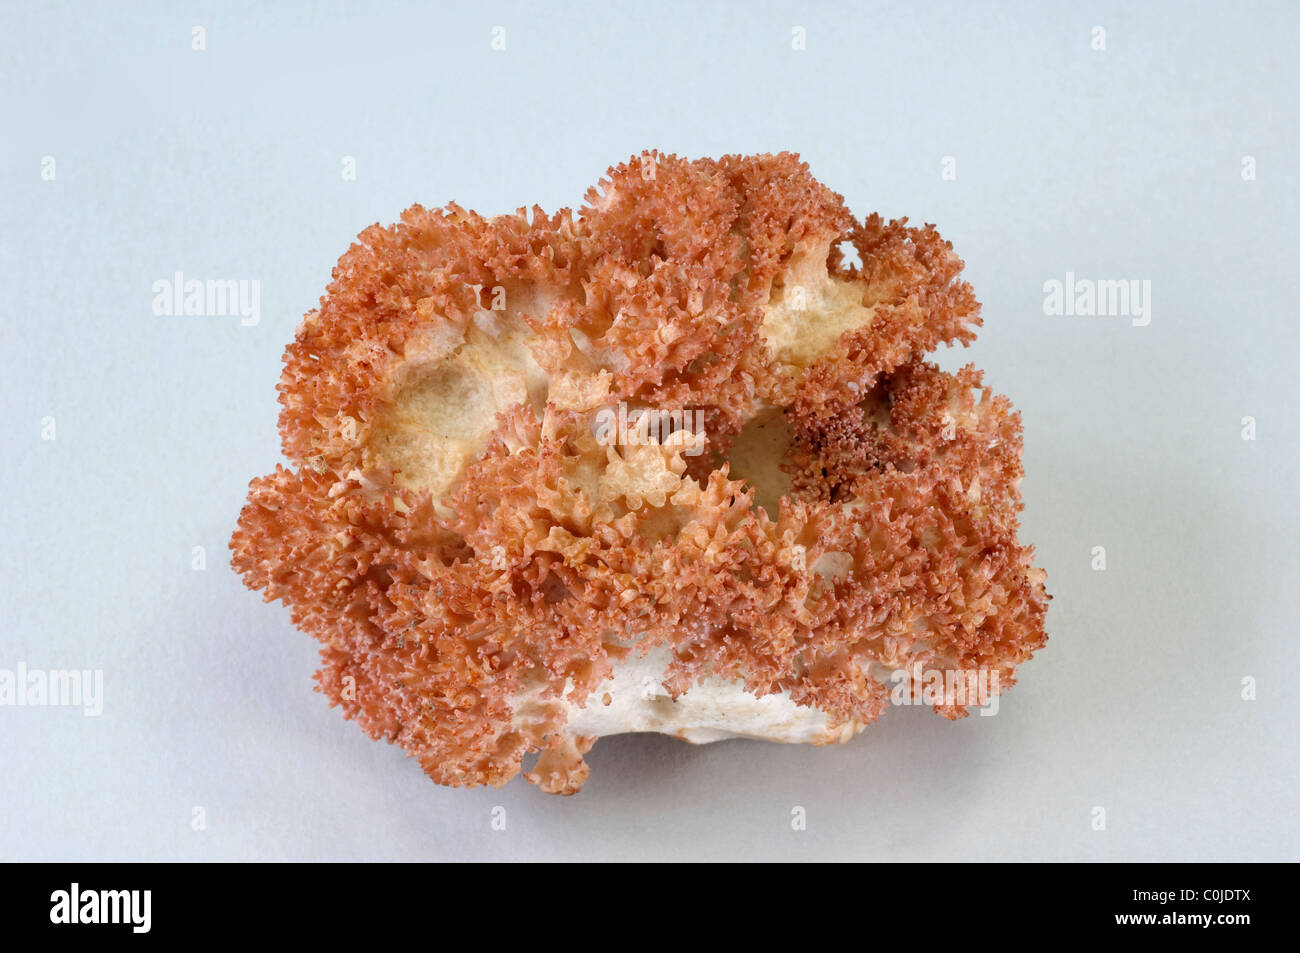 Caulilower Coral (Ramaria botrytis), fruiting body, studio picture against a white background. Stock Photo